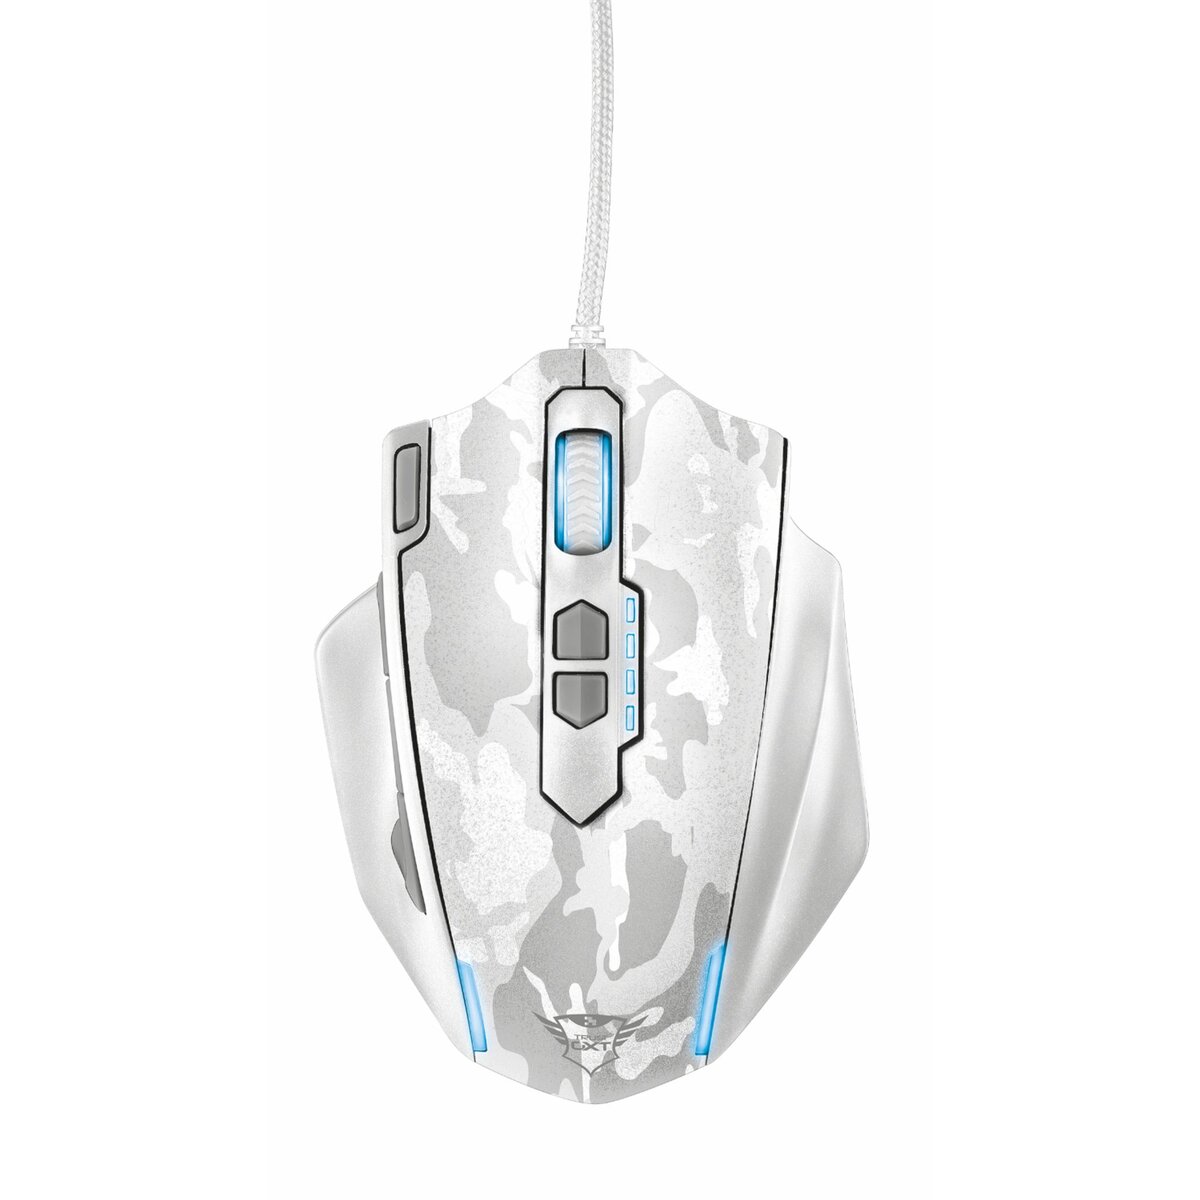 TRUST Souris gamer - Filaire - GXT 155W - Blanc camouflage